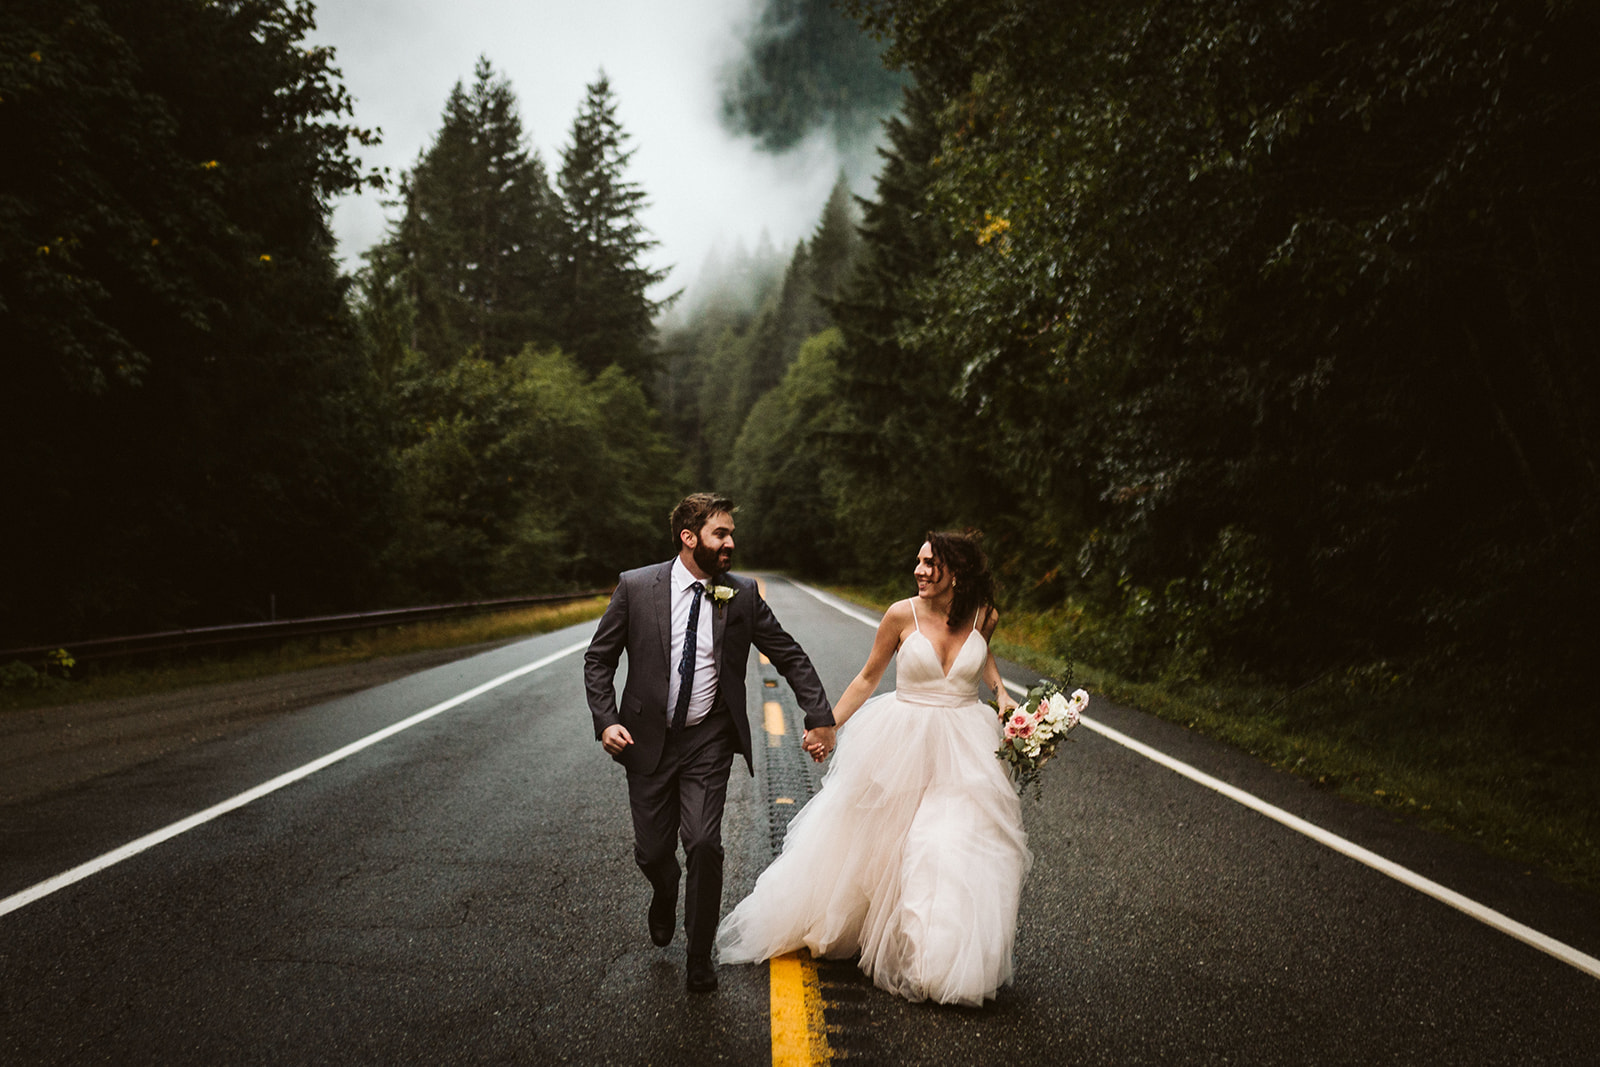 A bride and groom run hand-in-hand down a road surrounded with misty evergreen woods.